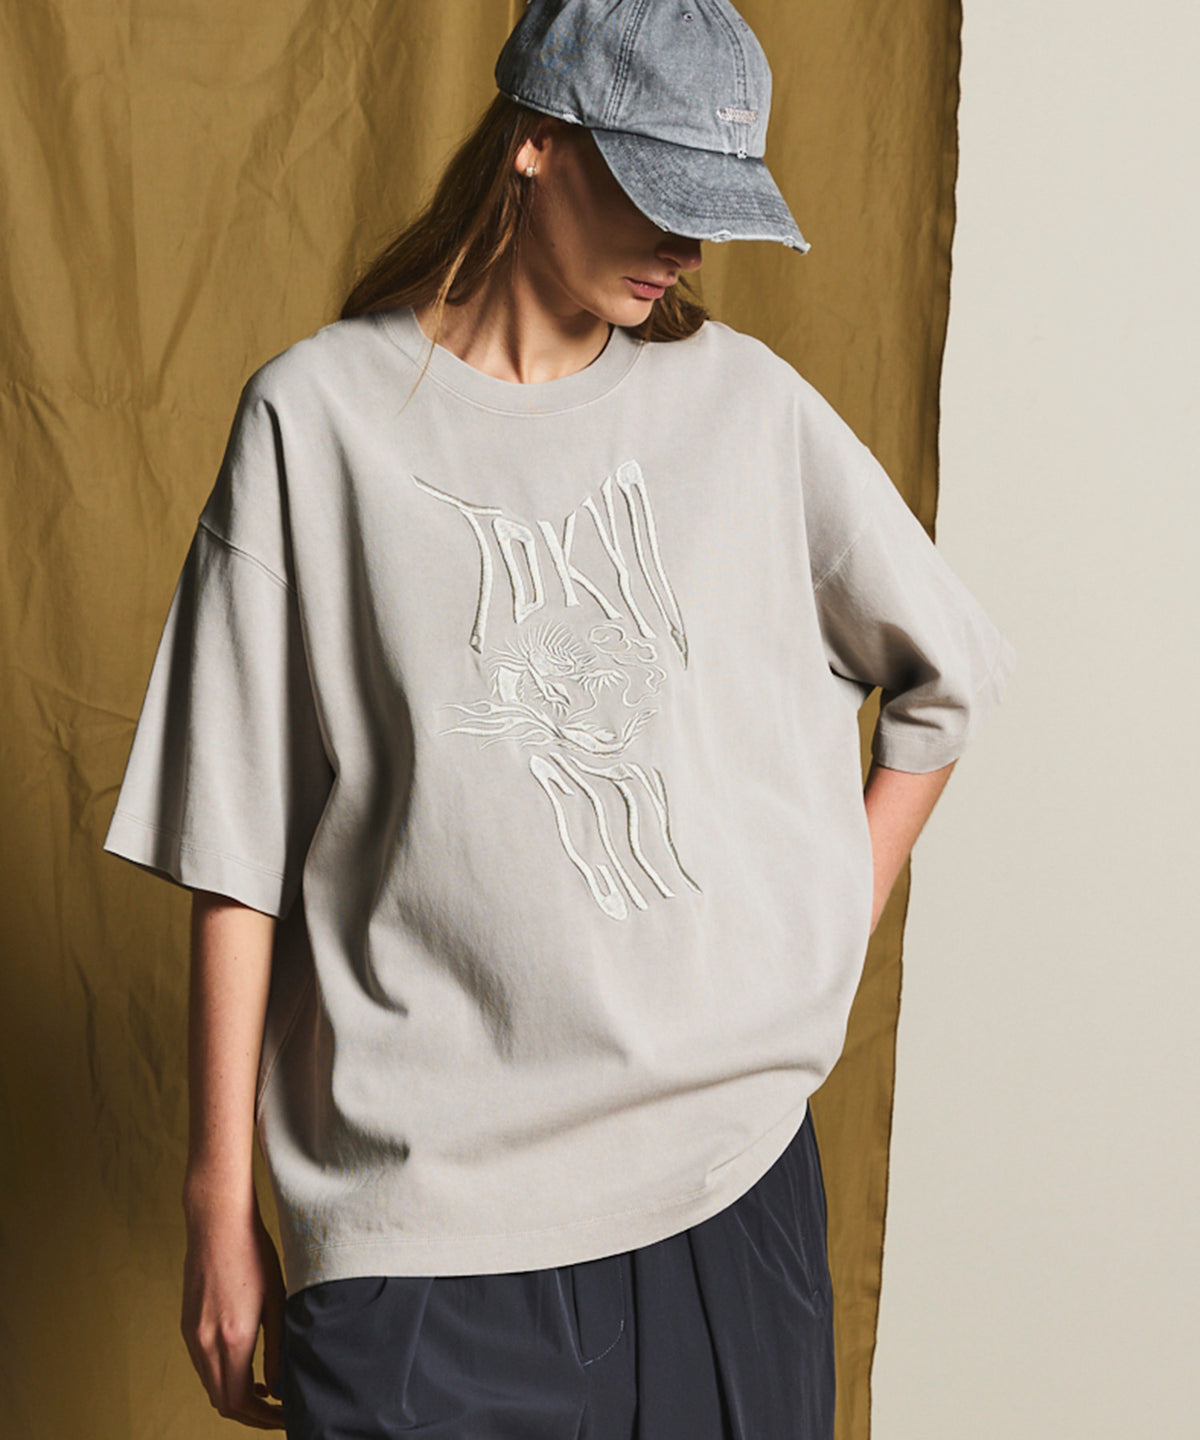 【SALE】「TOKYO CITY」Dragon Embroidery Prime-Over Pigment Crew Neck T-shirt